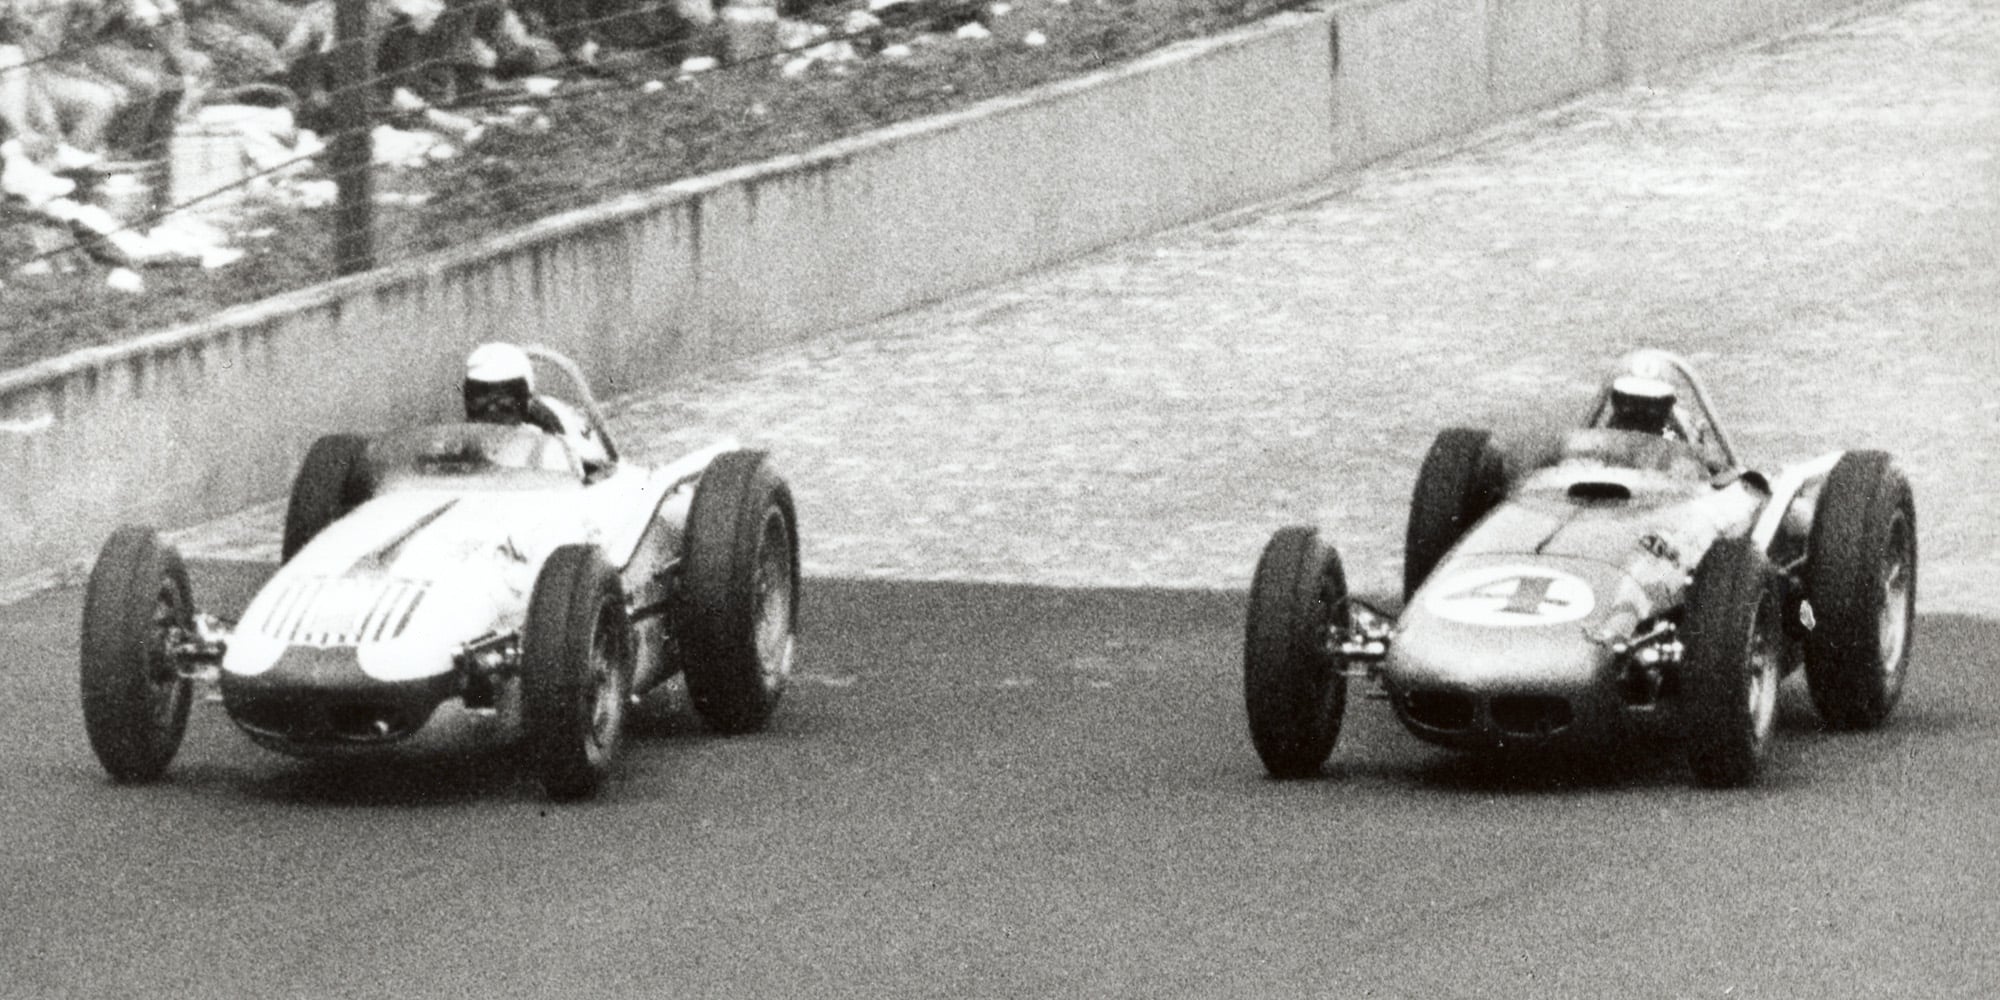 Jim Rathmann and Rodger Ward almost side by side during the 1960 Indy 500